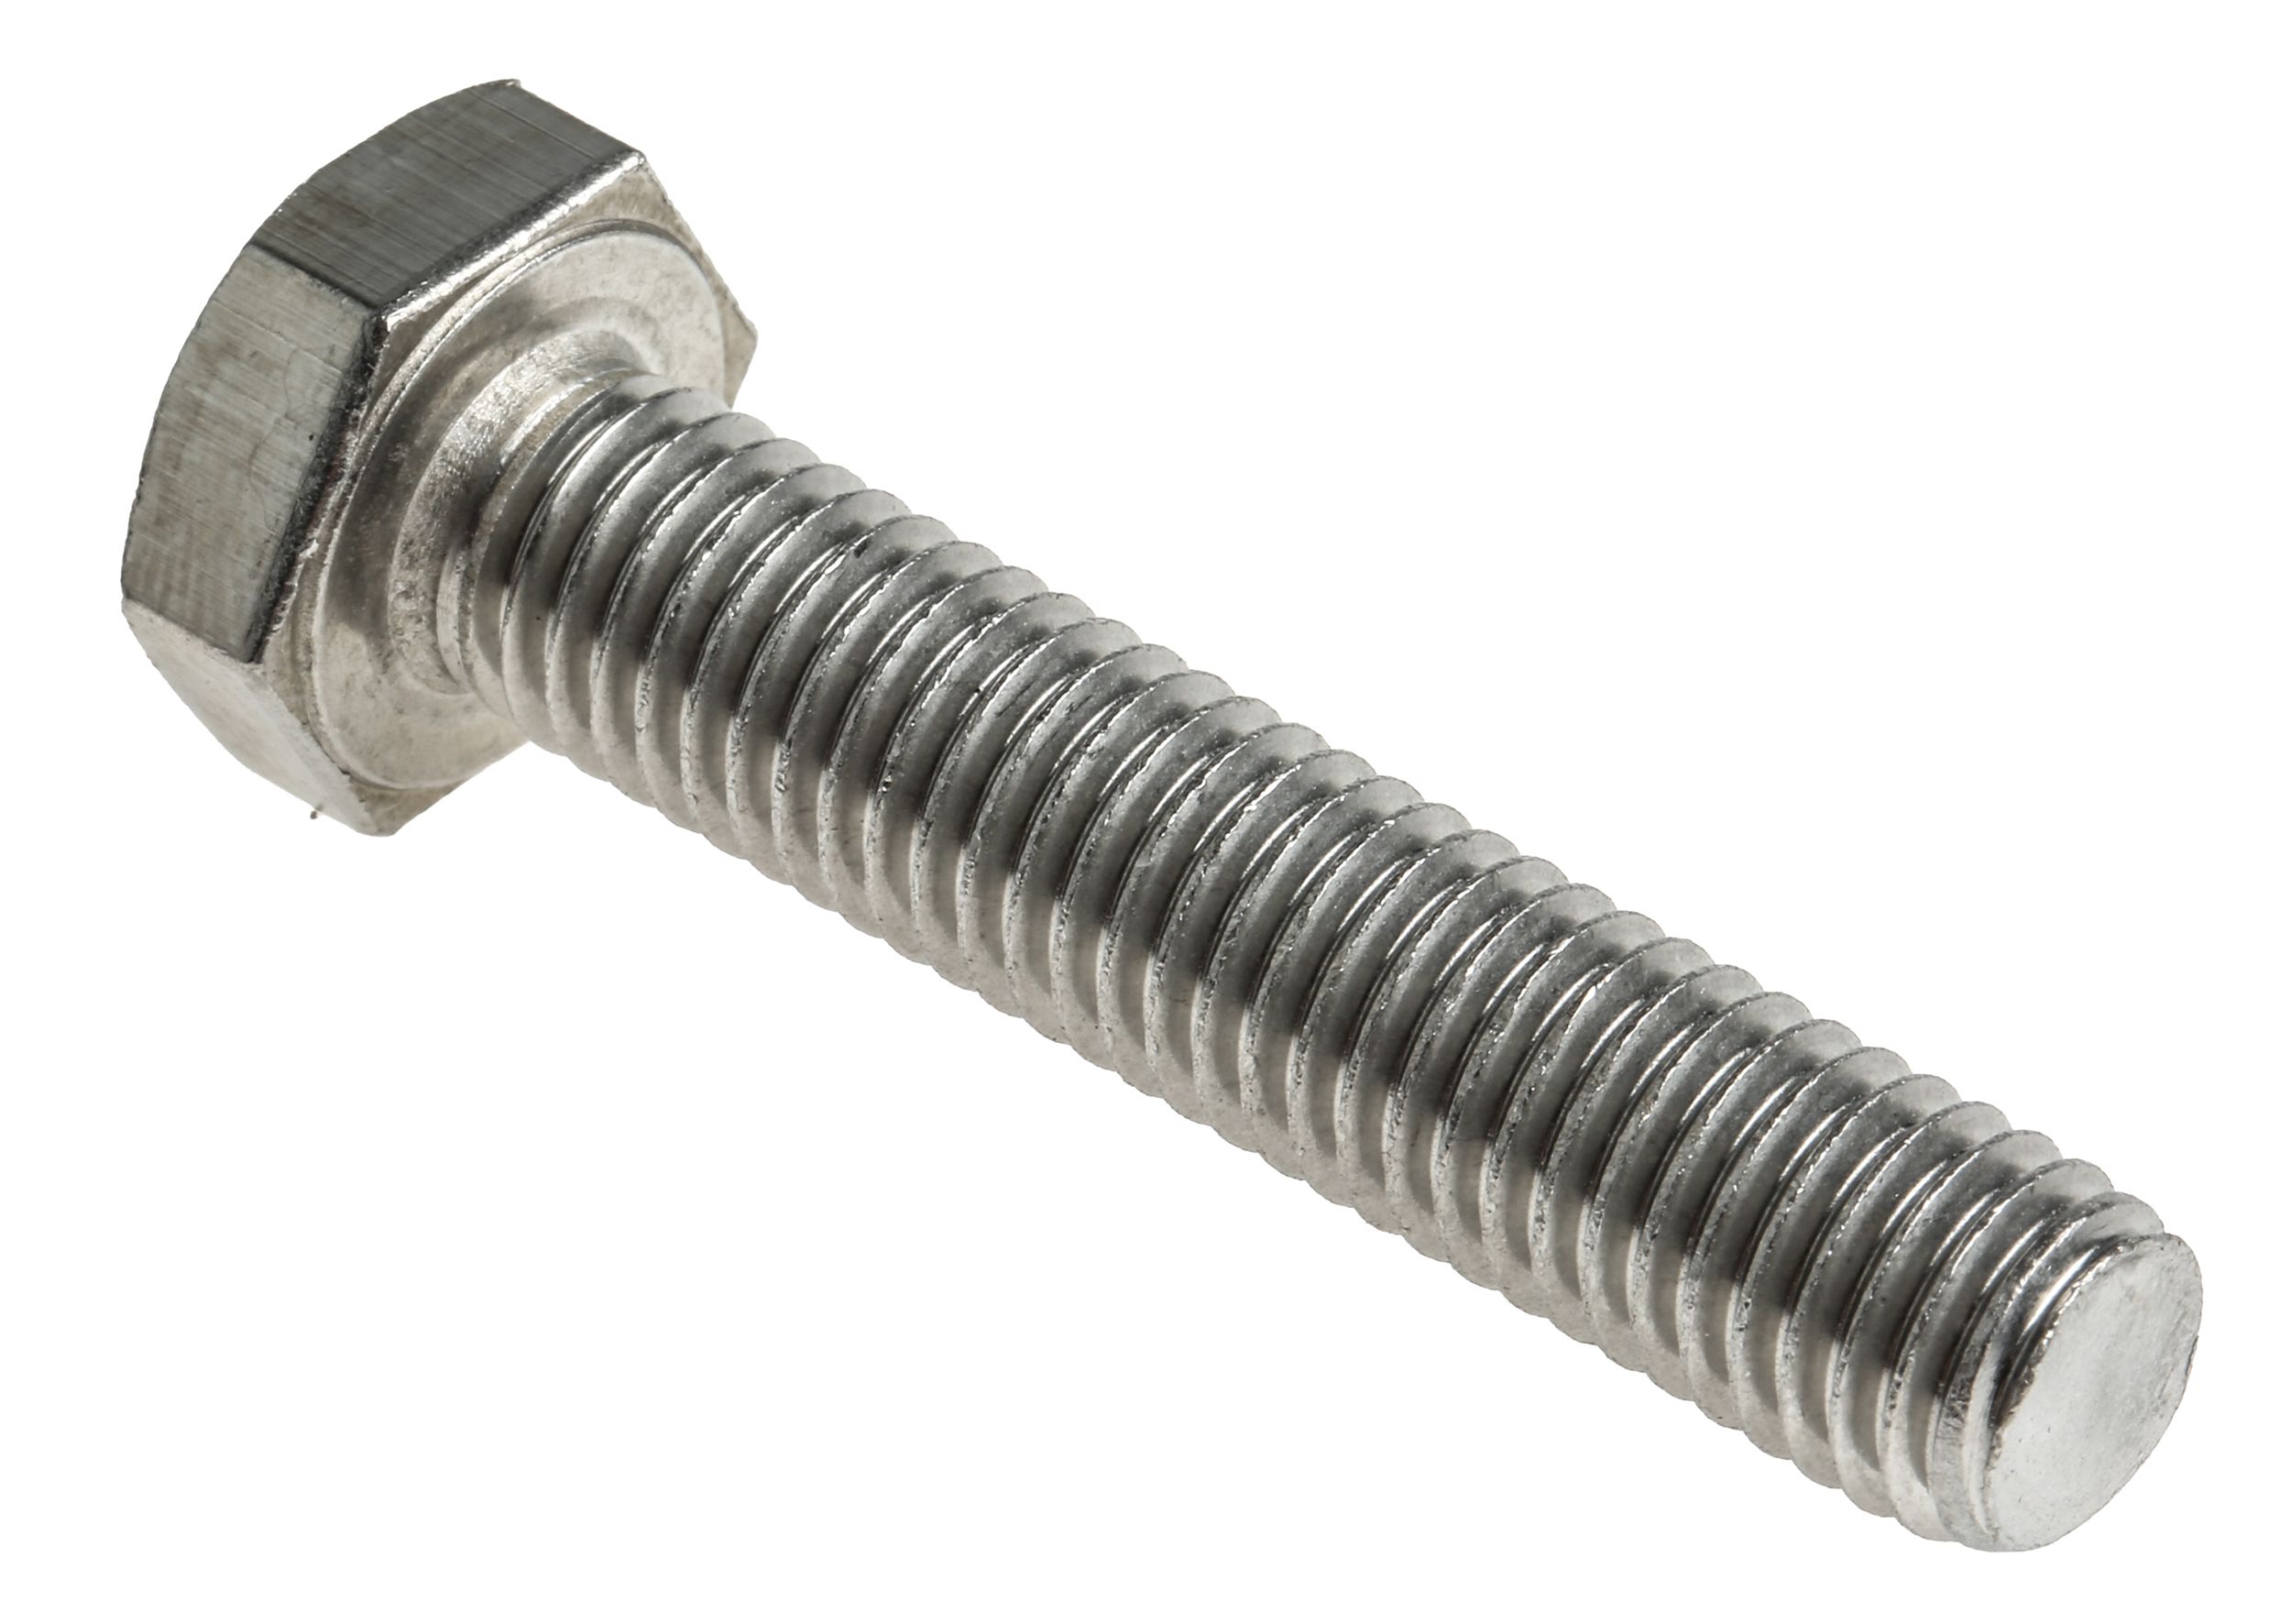 Plain Stainless Steel Hex, Hex Bolt, M10 x 50mm